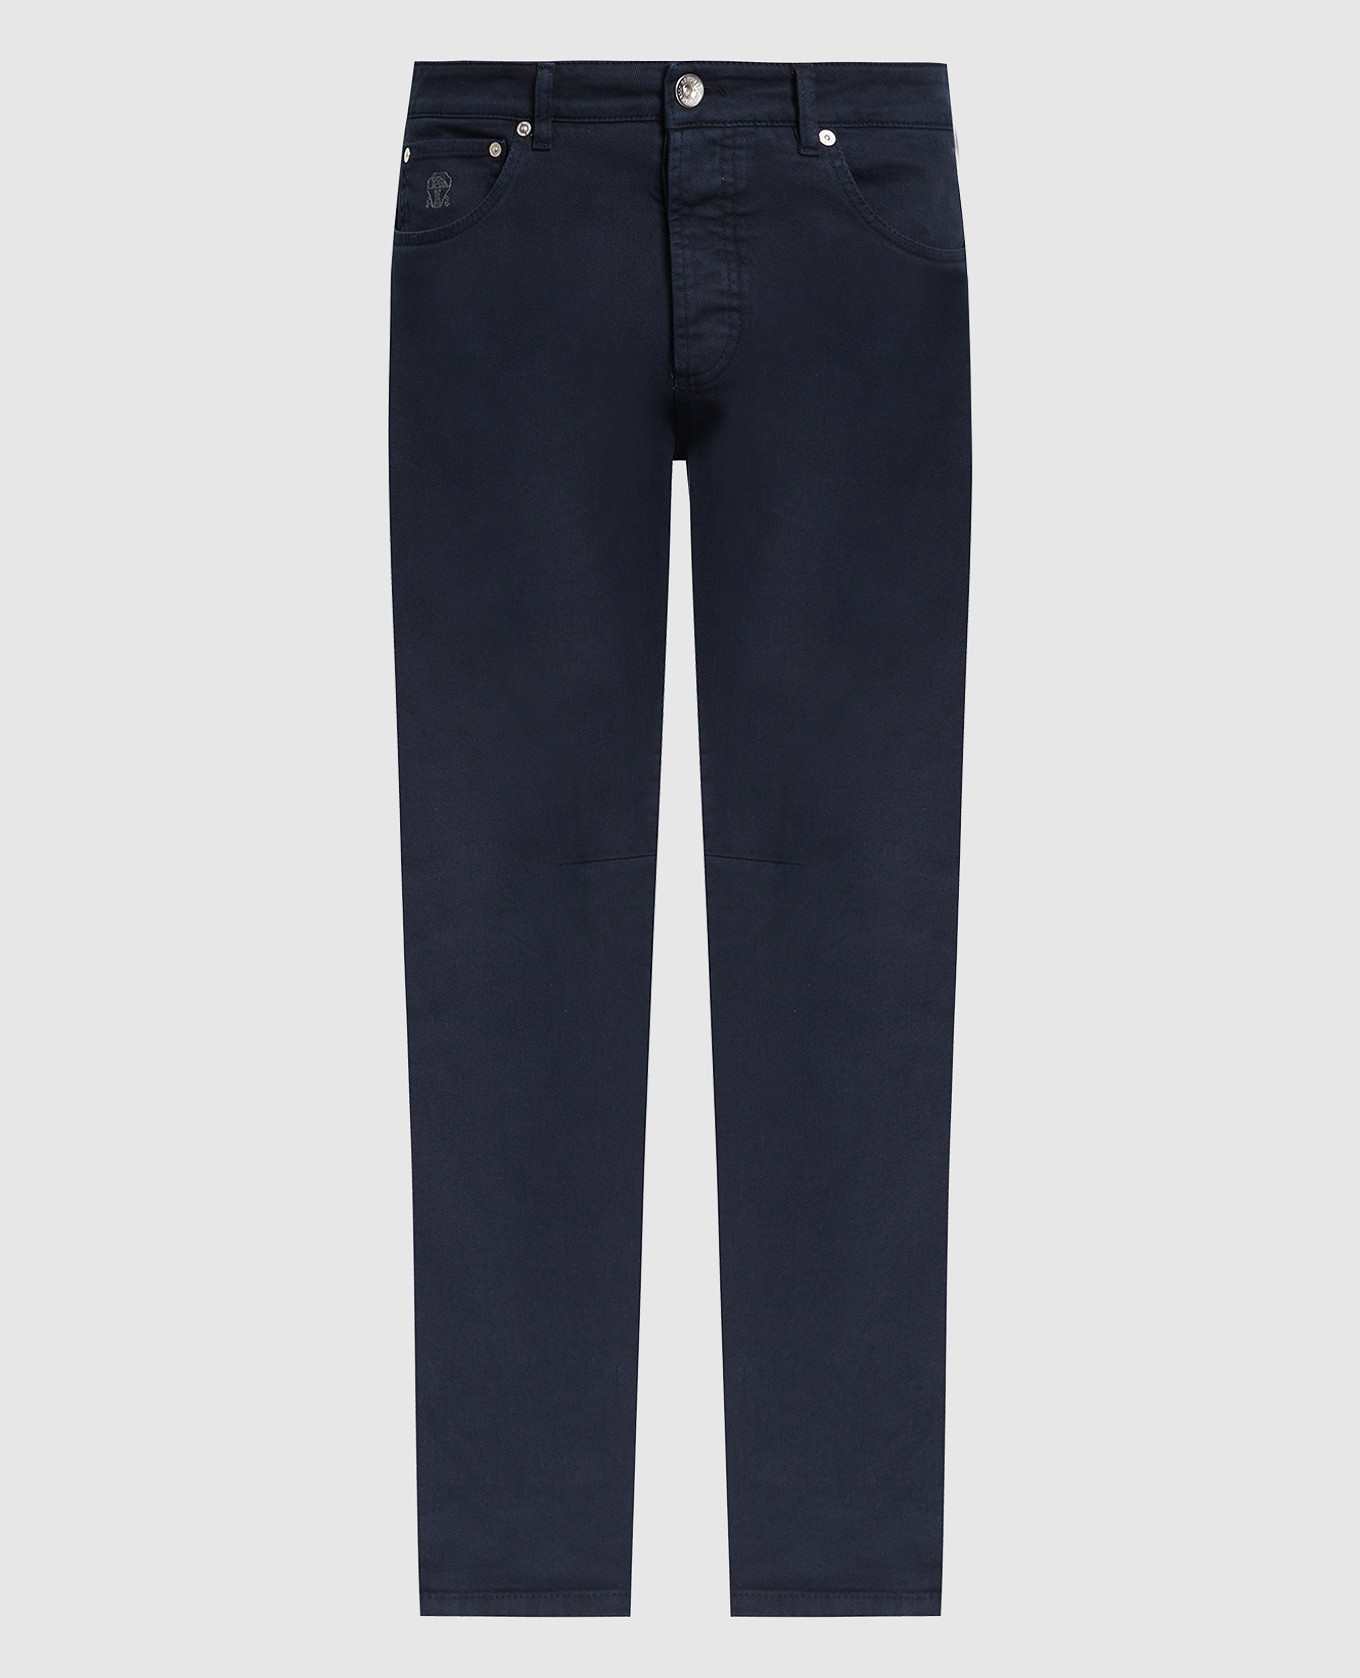 Brunello Cucinelli - Blue jeans with logo embroidery M277PX1290 - buy ...